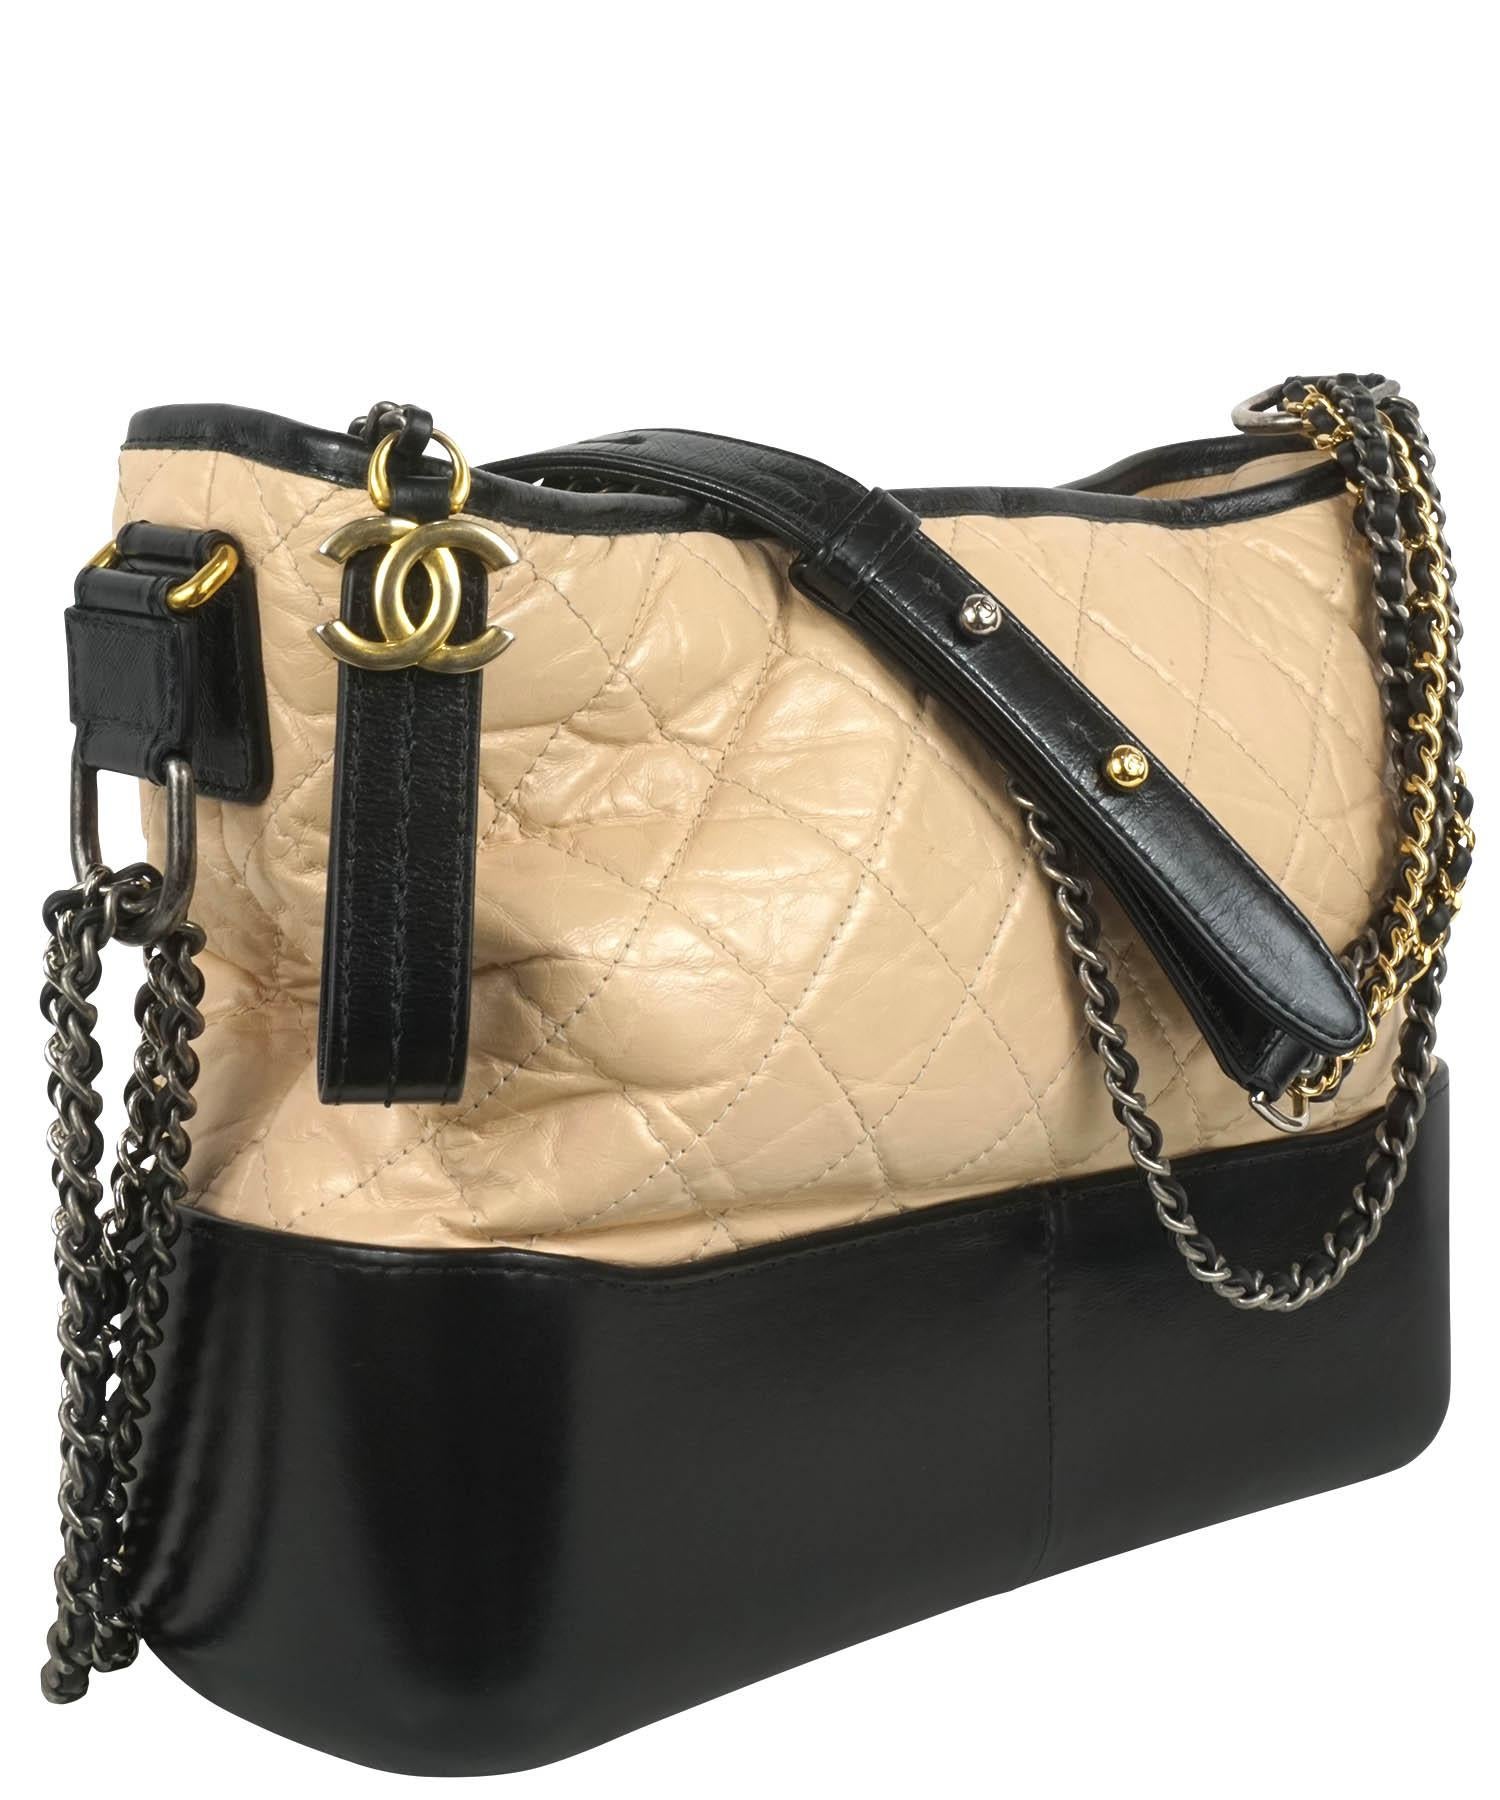 Chanel medium Gabrielle bag, from their 2018 Autumn Collection. Bag has beige quilted aged calfskin leather with a smooth black leather bottom and matching black leather accents. Bag strap has three mixed metal black leather wrapped straps, has a